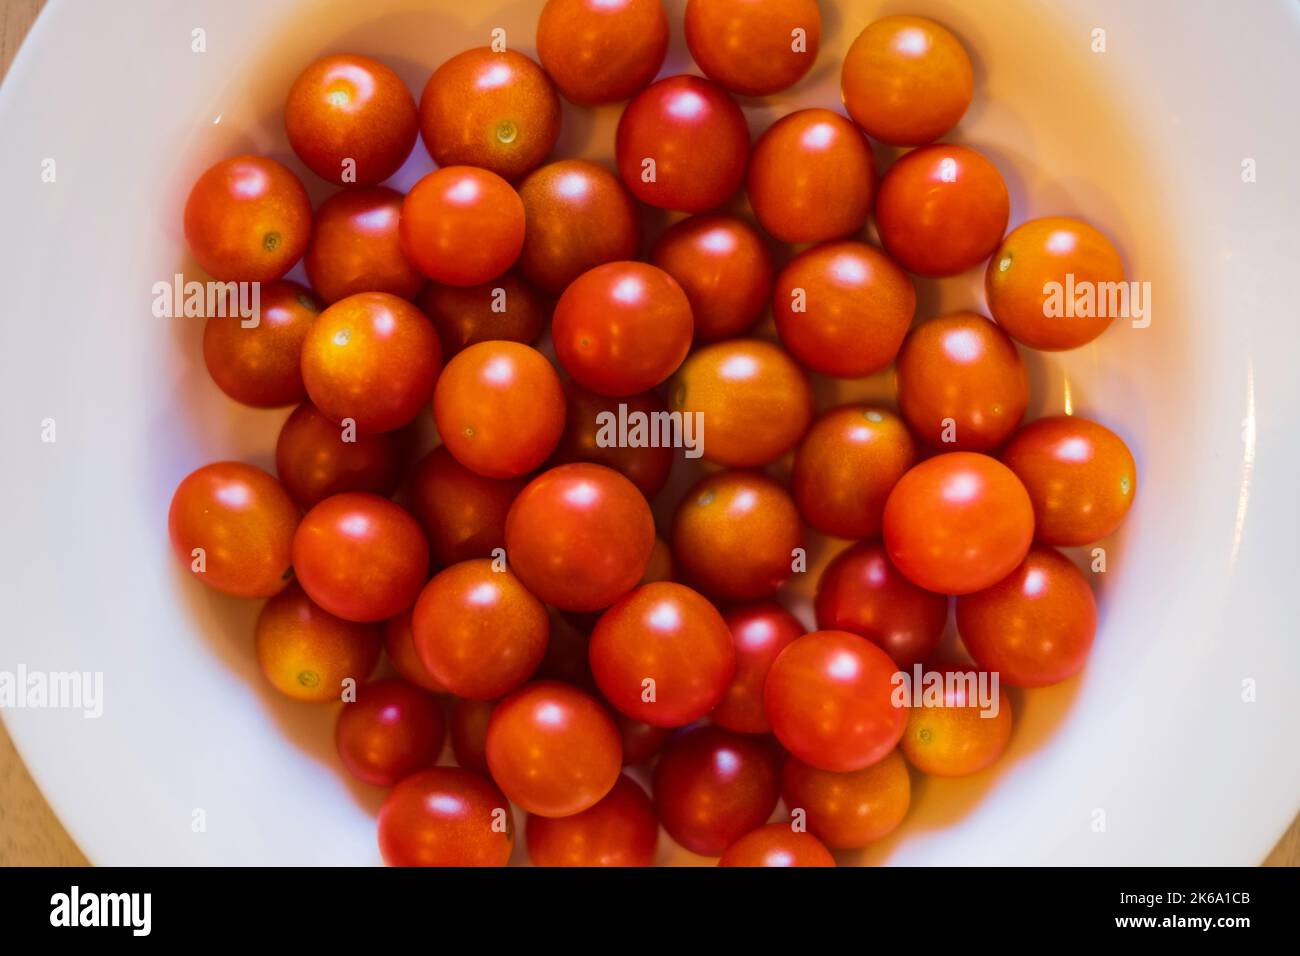 Cherry tomatoes also known as grape tomatoes. Home grown. Indeterminate, hybrid cultivar. Super Sweet 100 variety. Kansas, USA. Stock Photo